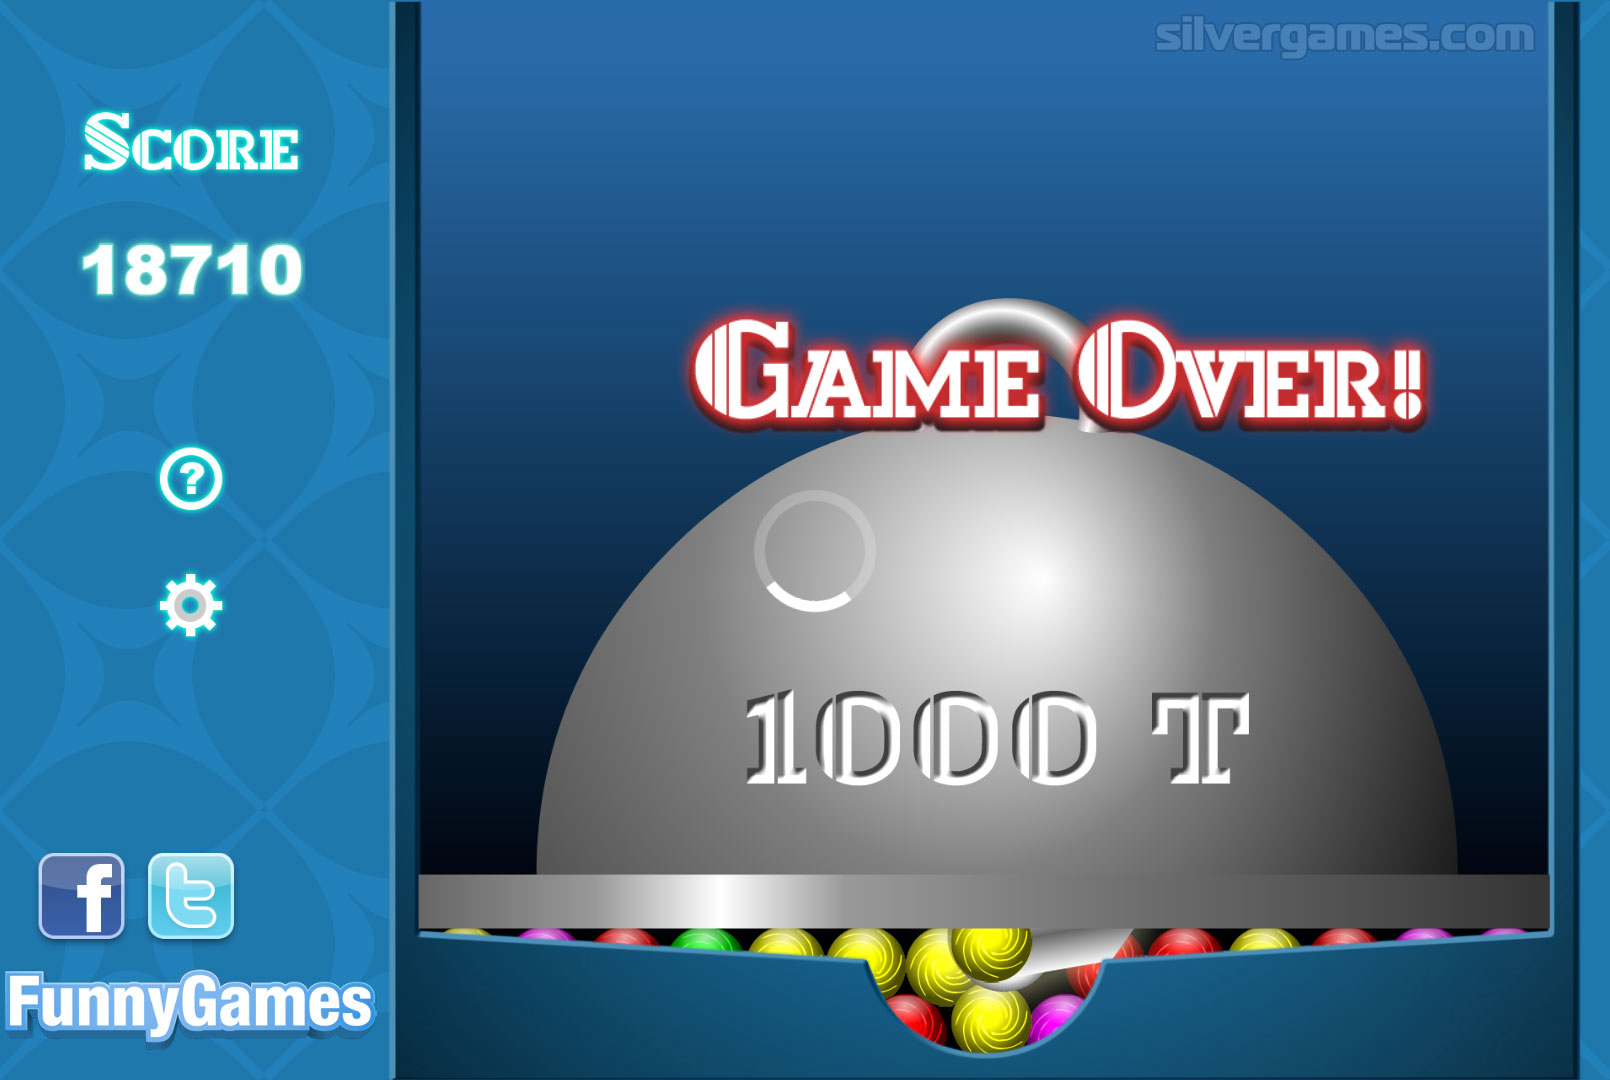 bouncing ball play online game